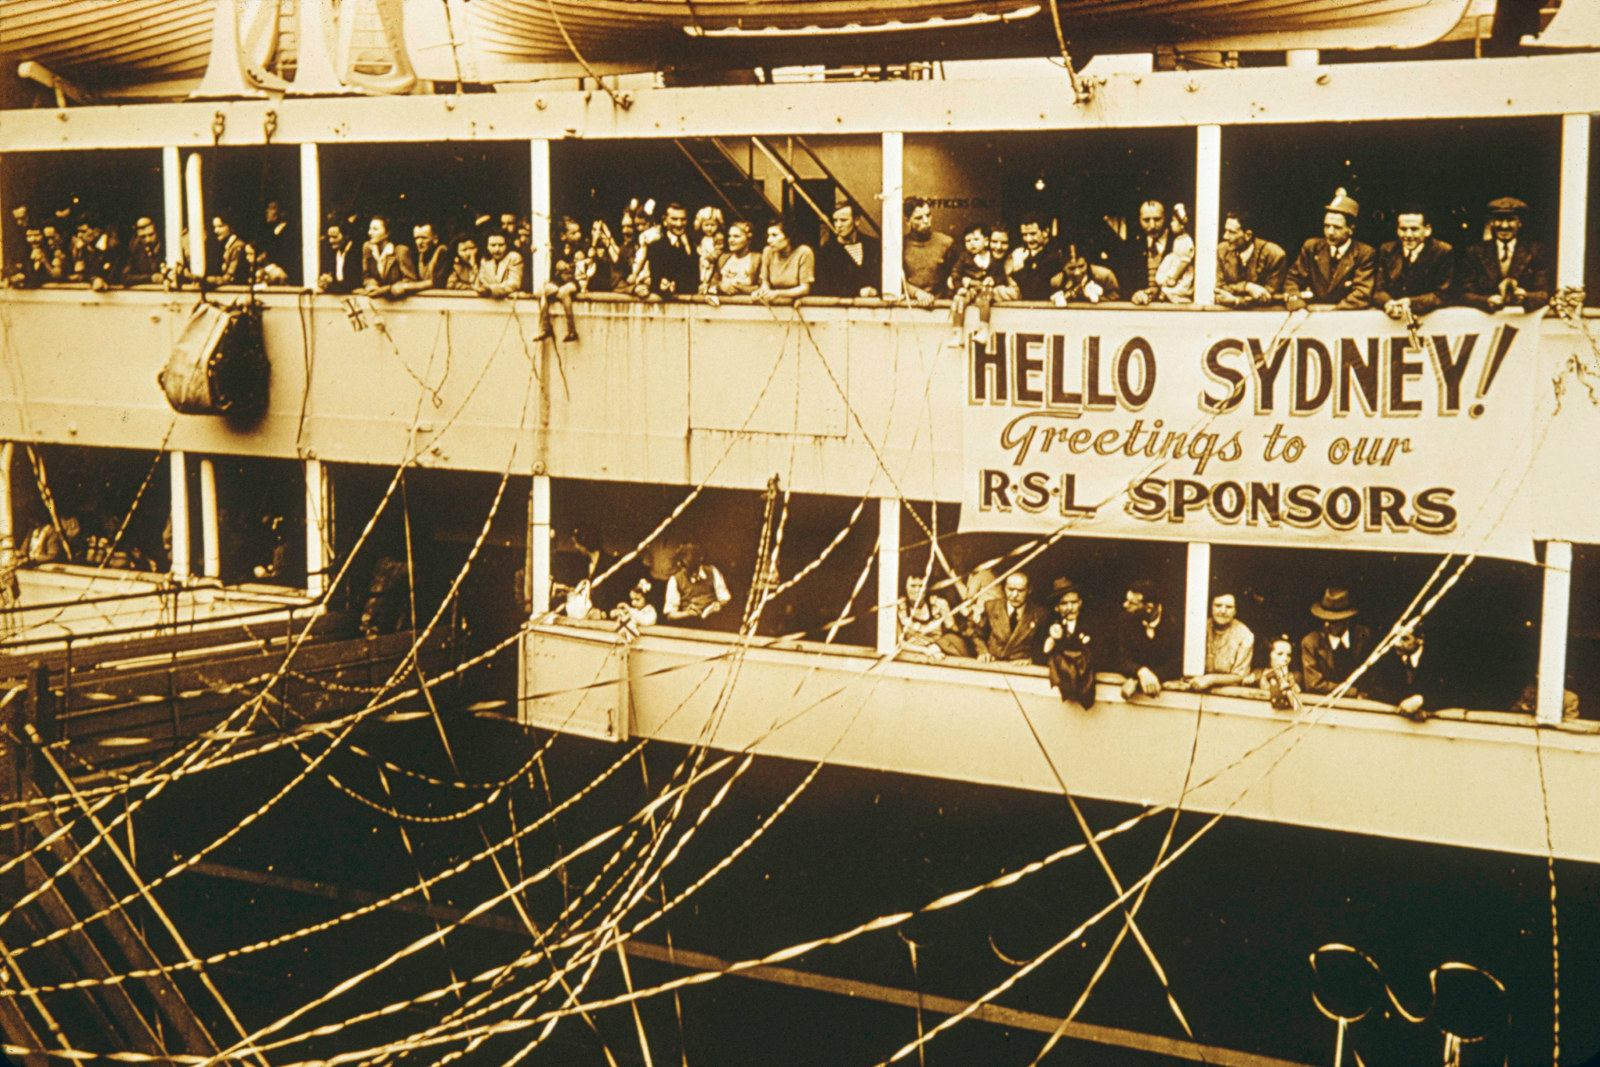 Sepia photograph of people waving from a ship.